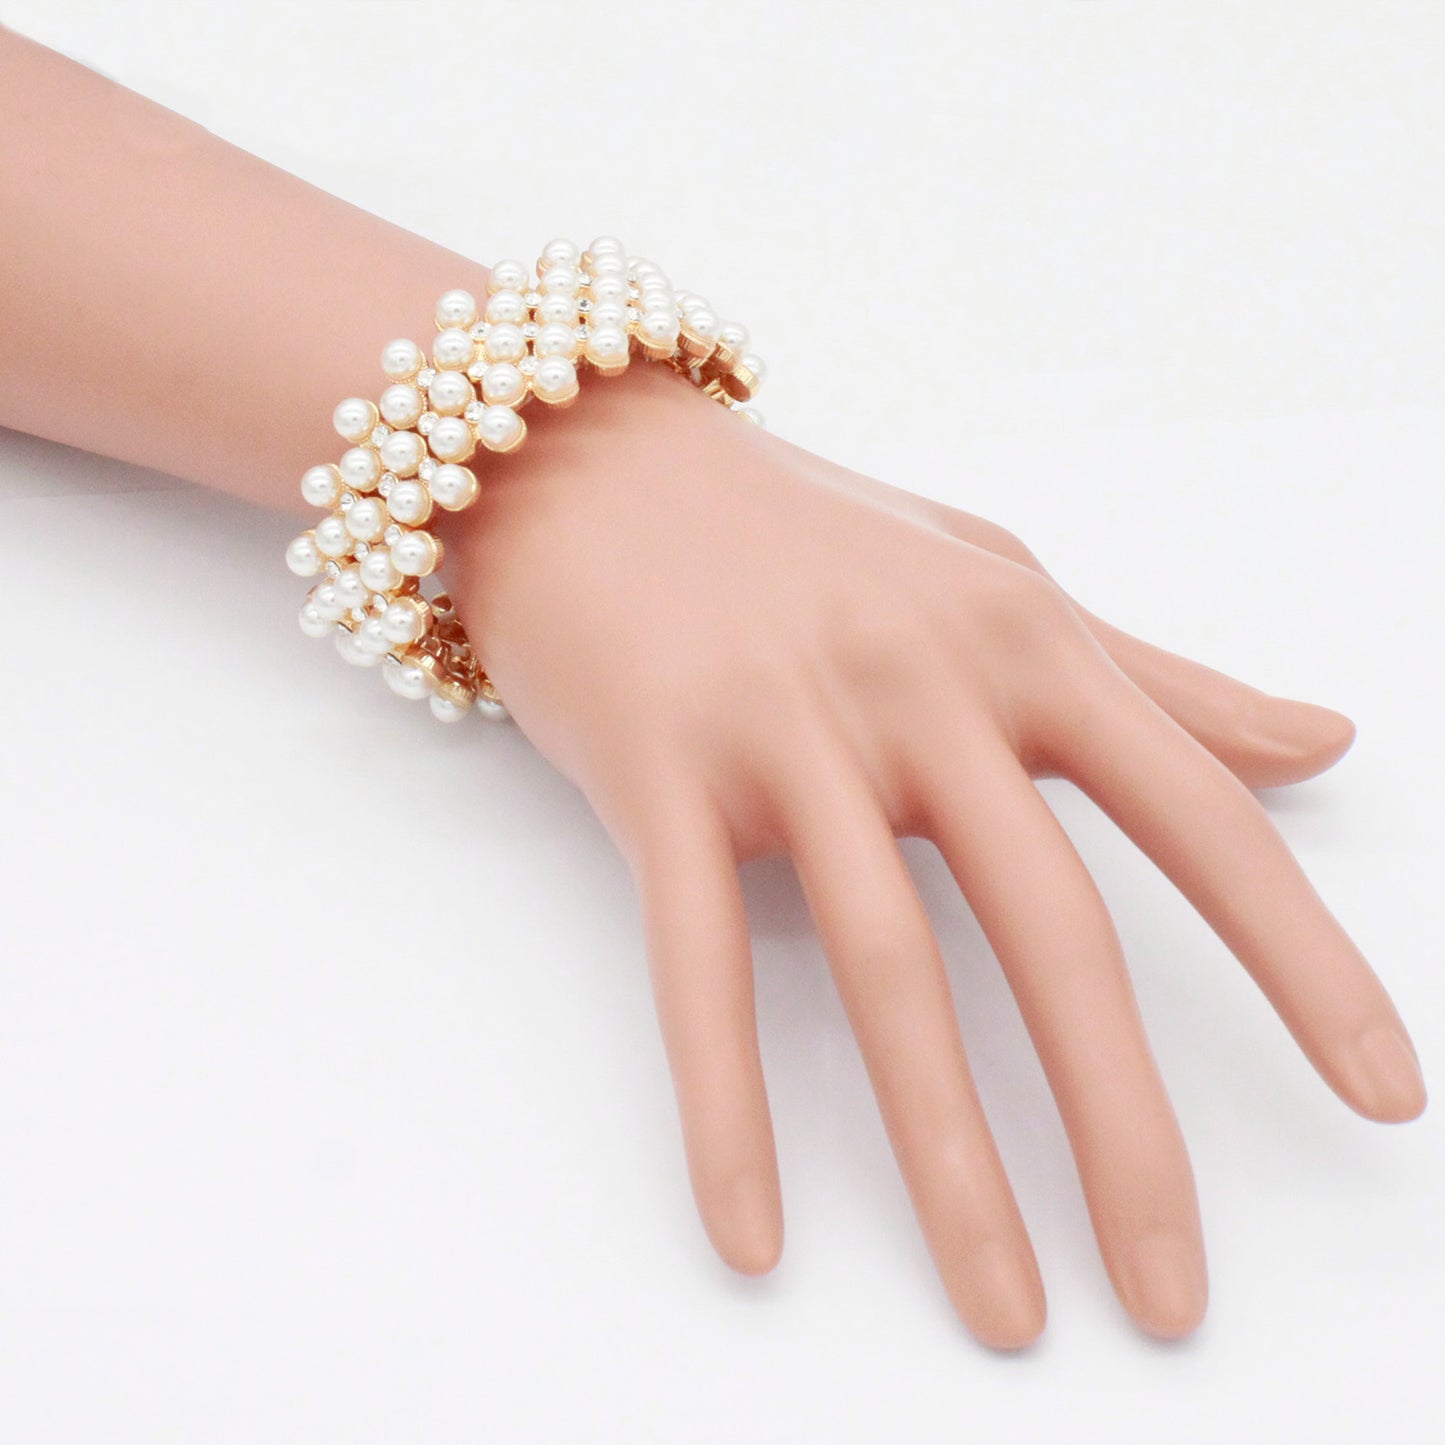 Lavencious Simulated Pearl 5 Lines Elastic Stretch Bracelet Party Jewelry for Women - Gold